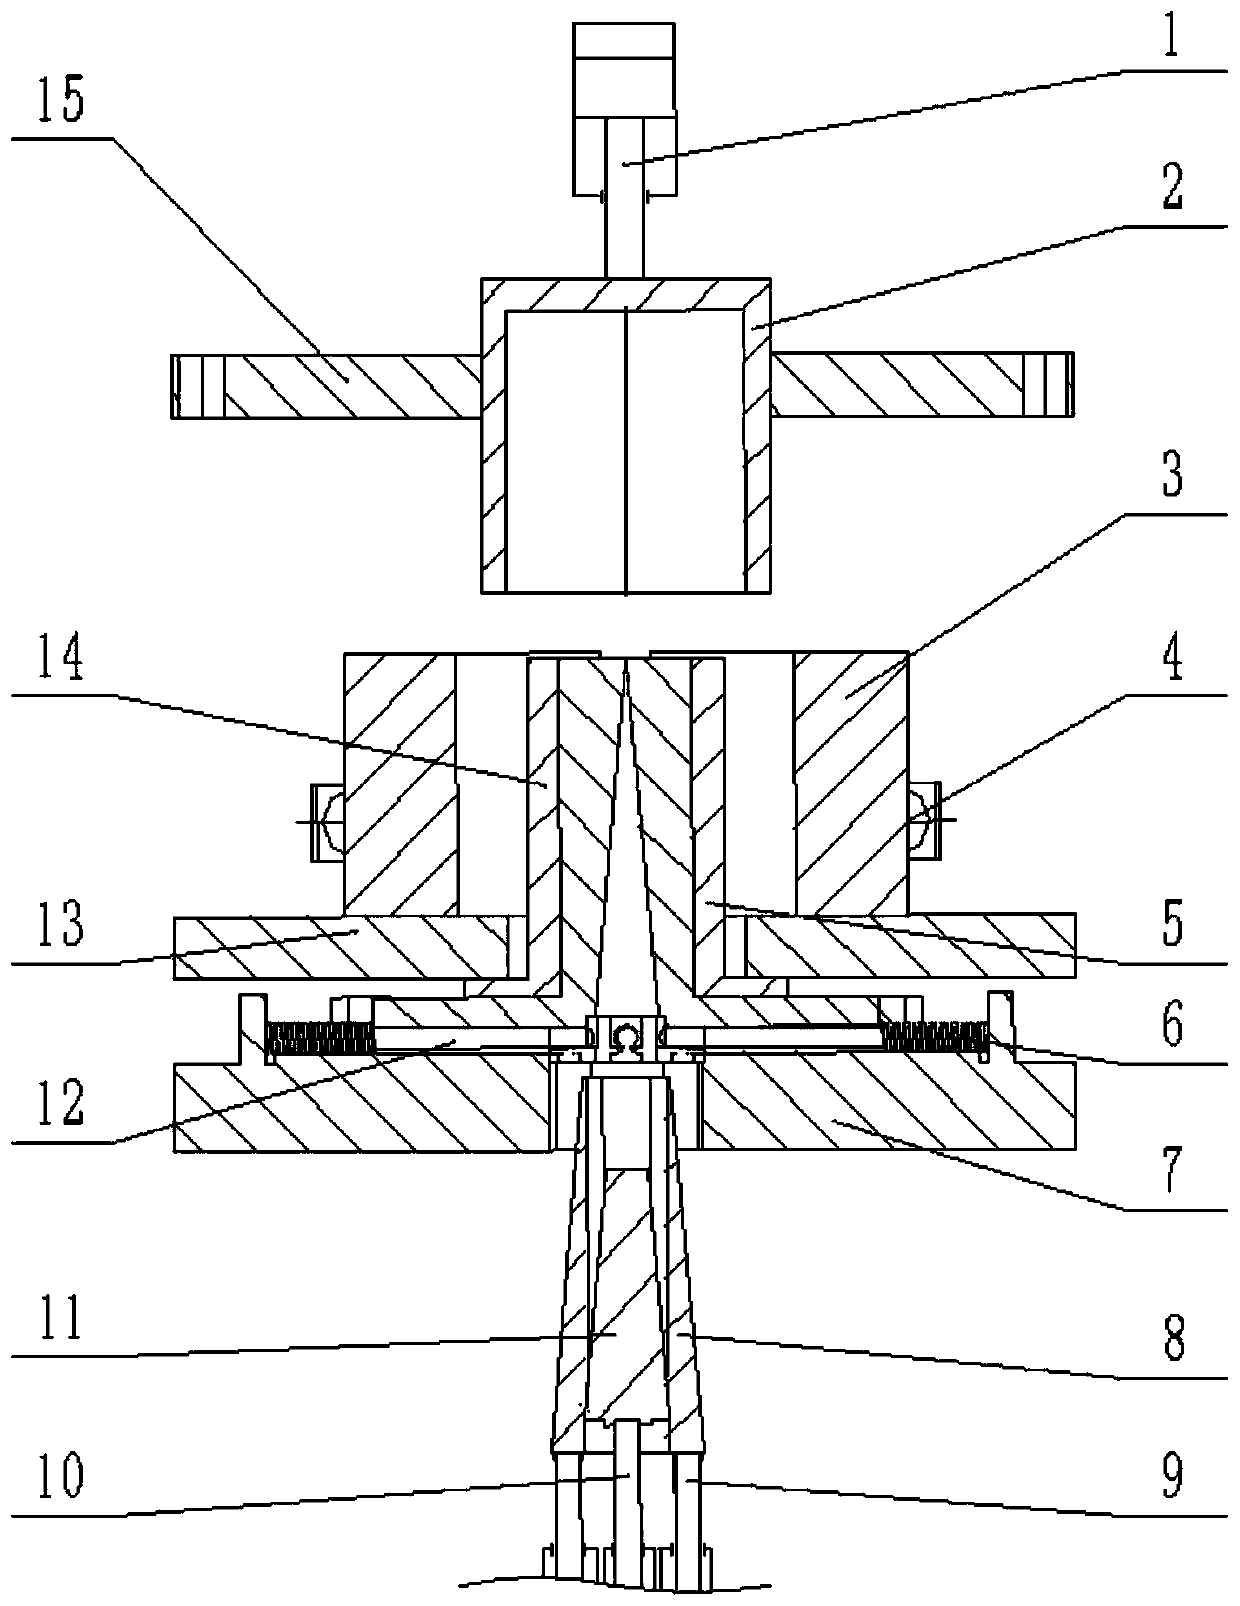 A forming device and method for complex inner and outer wall cylindrical parts